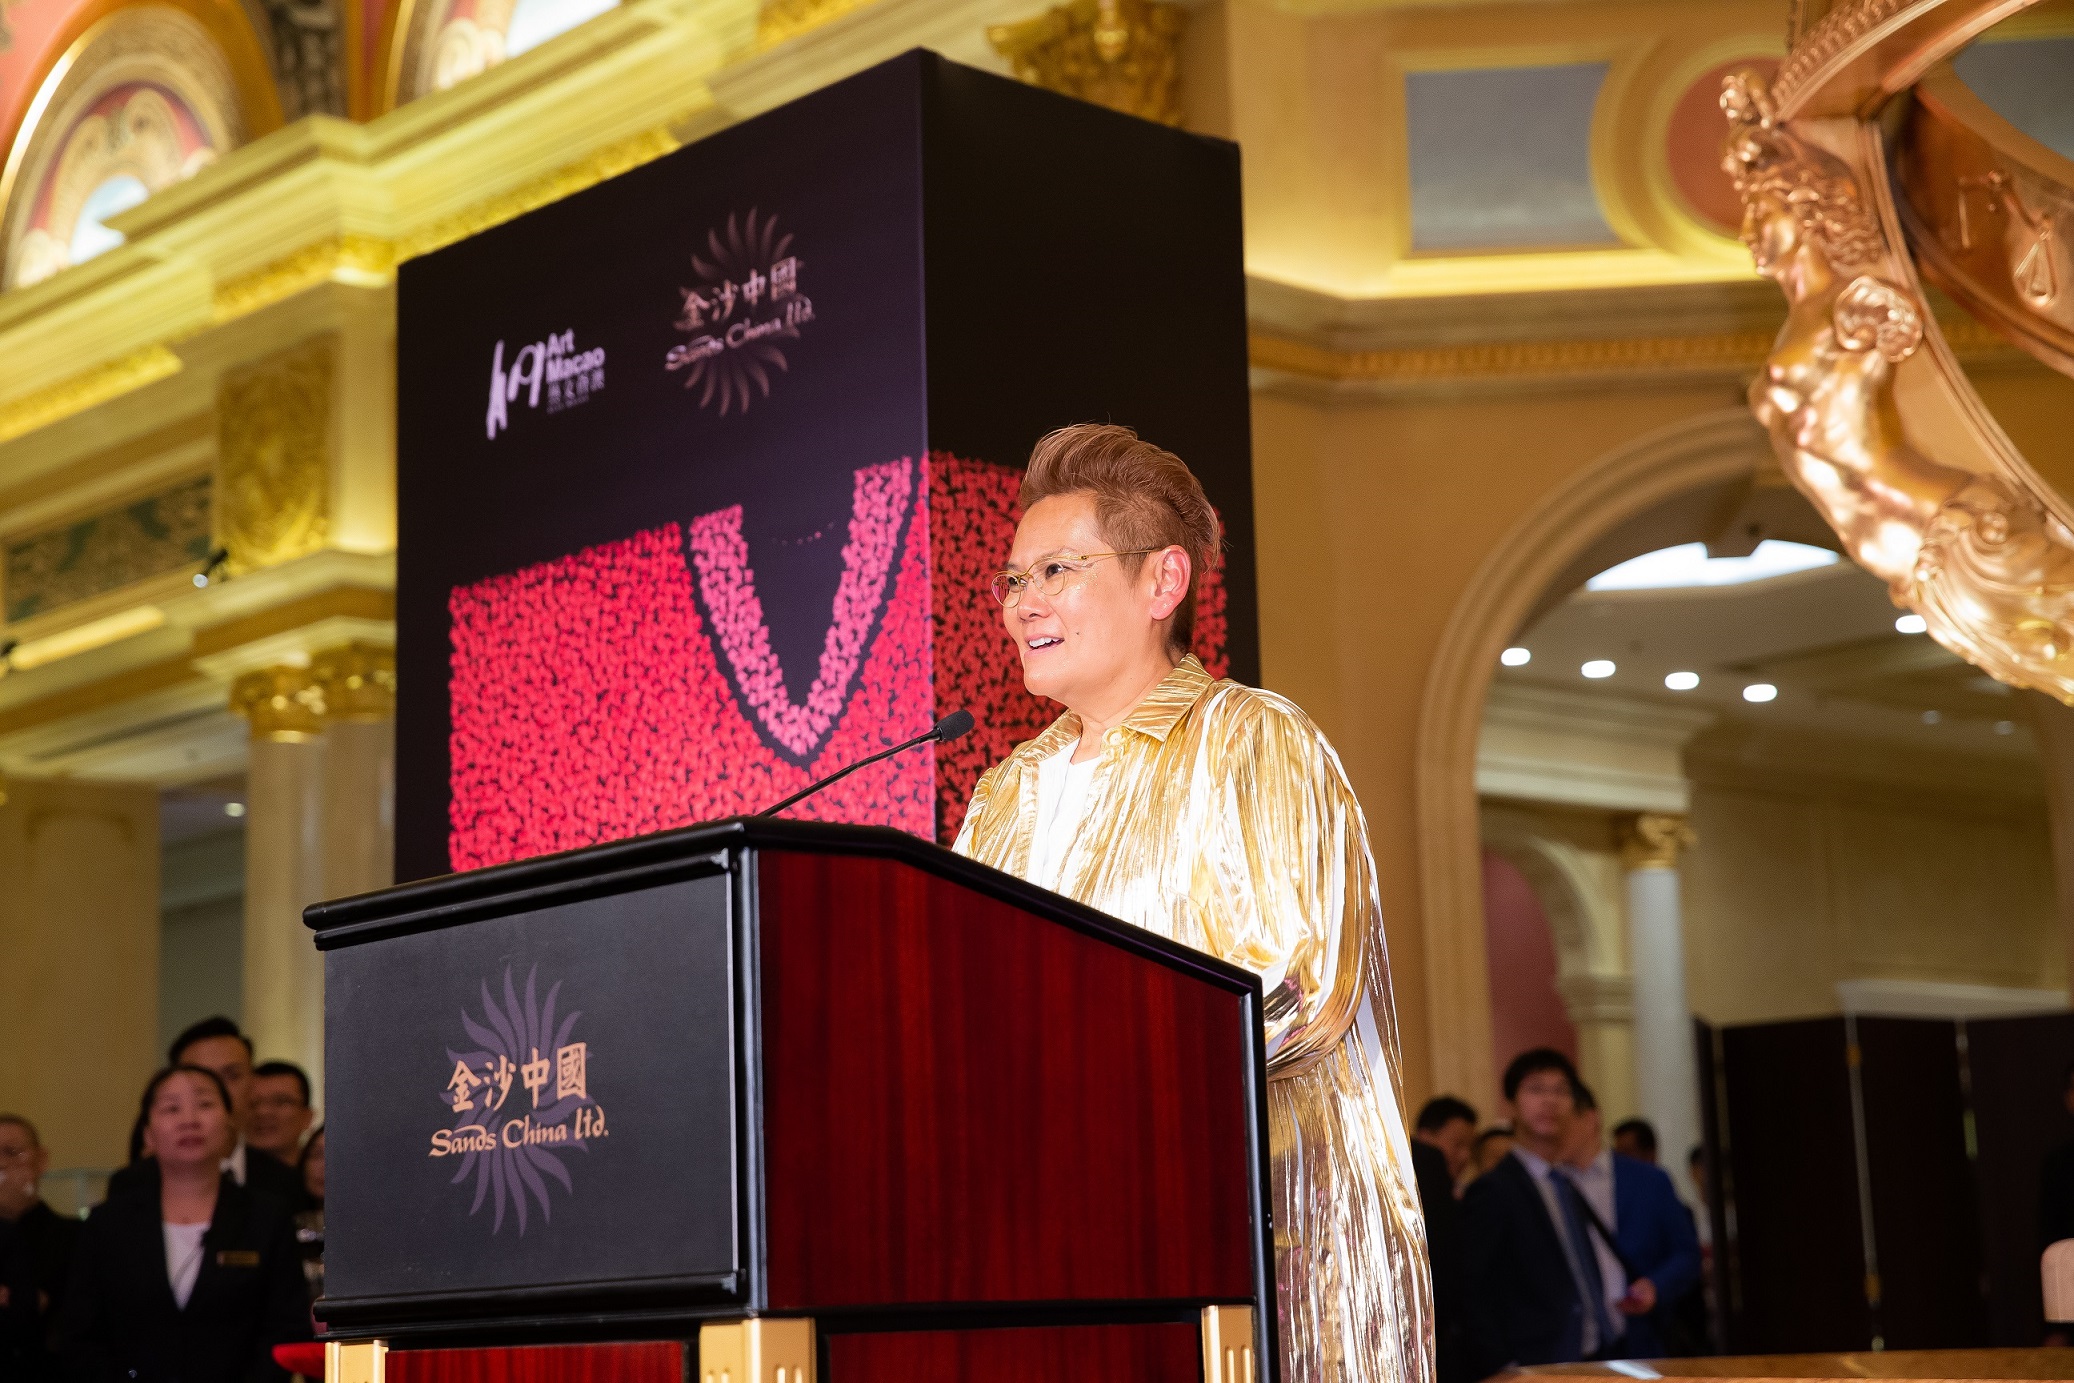 Ceramic artist Caroline Cheng talks about Sands China’s All That’s Gold Does Glitter – An Exhibition of Glamorous Ceramics at The Venetian Macao